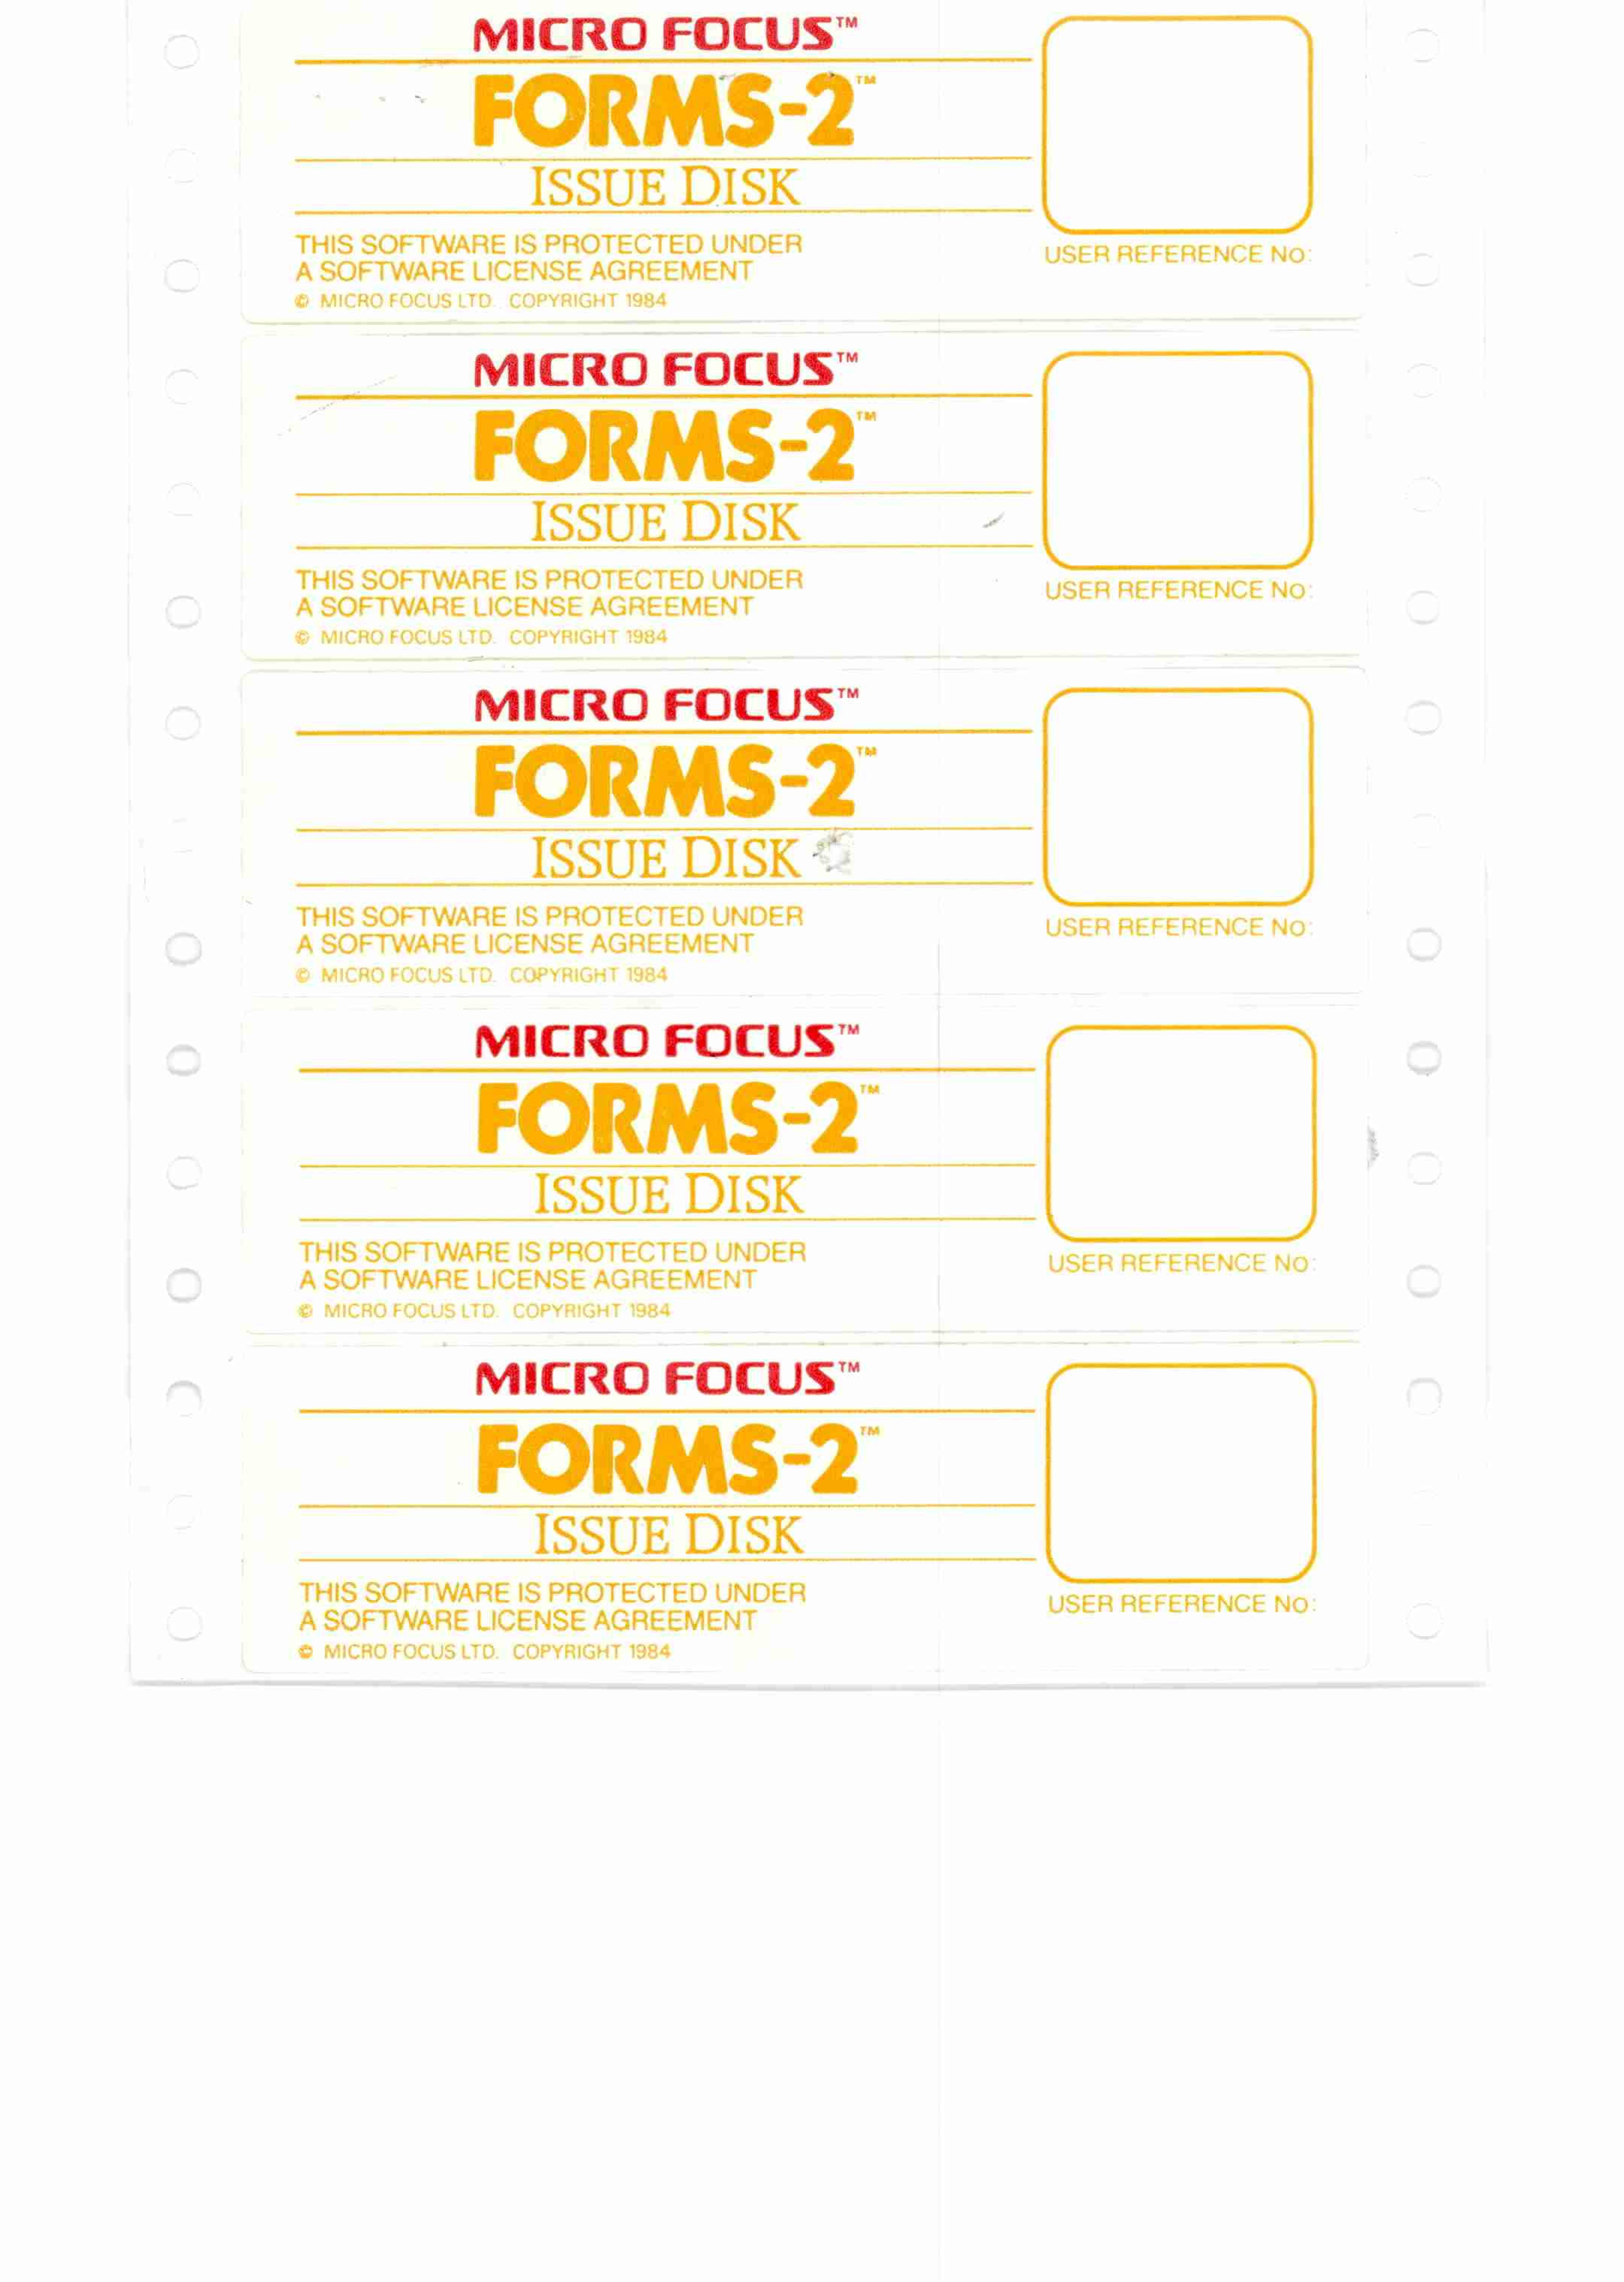  FORMS-2